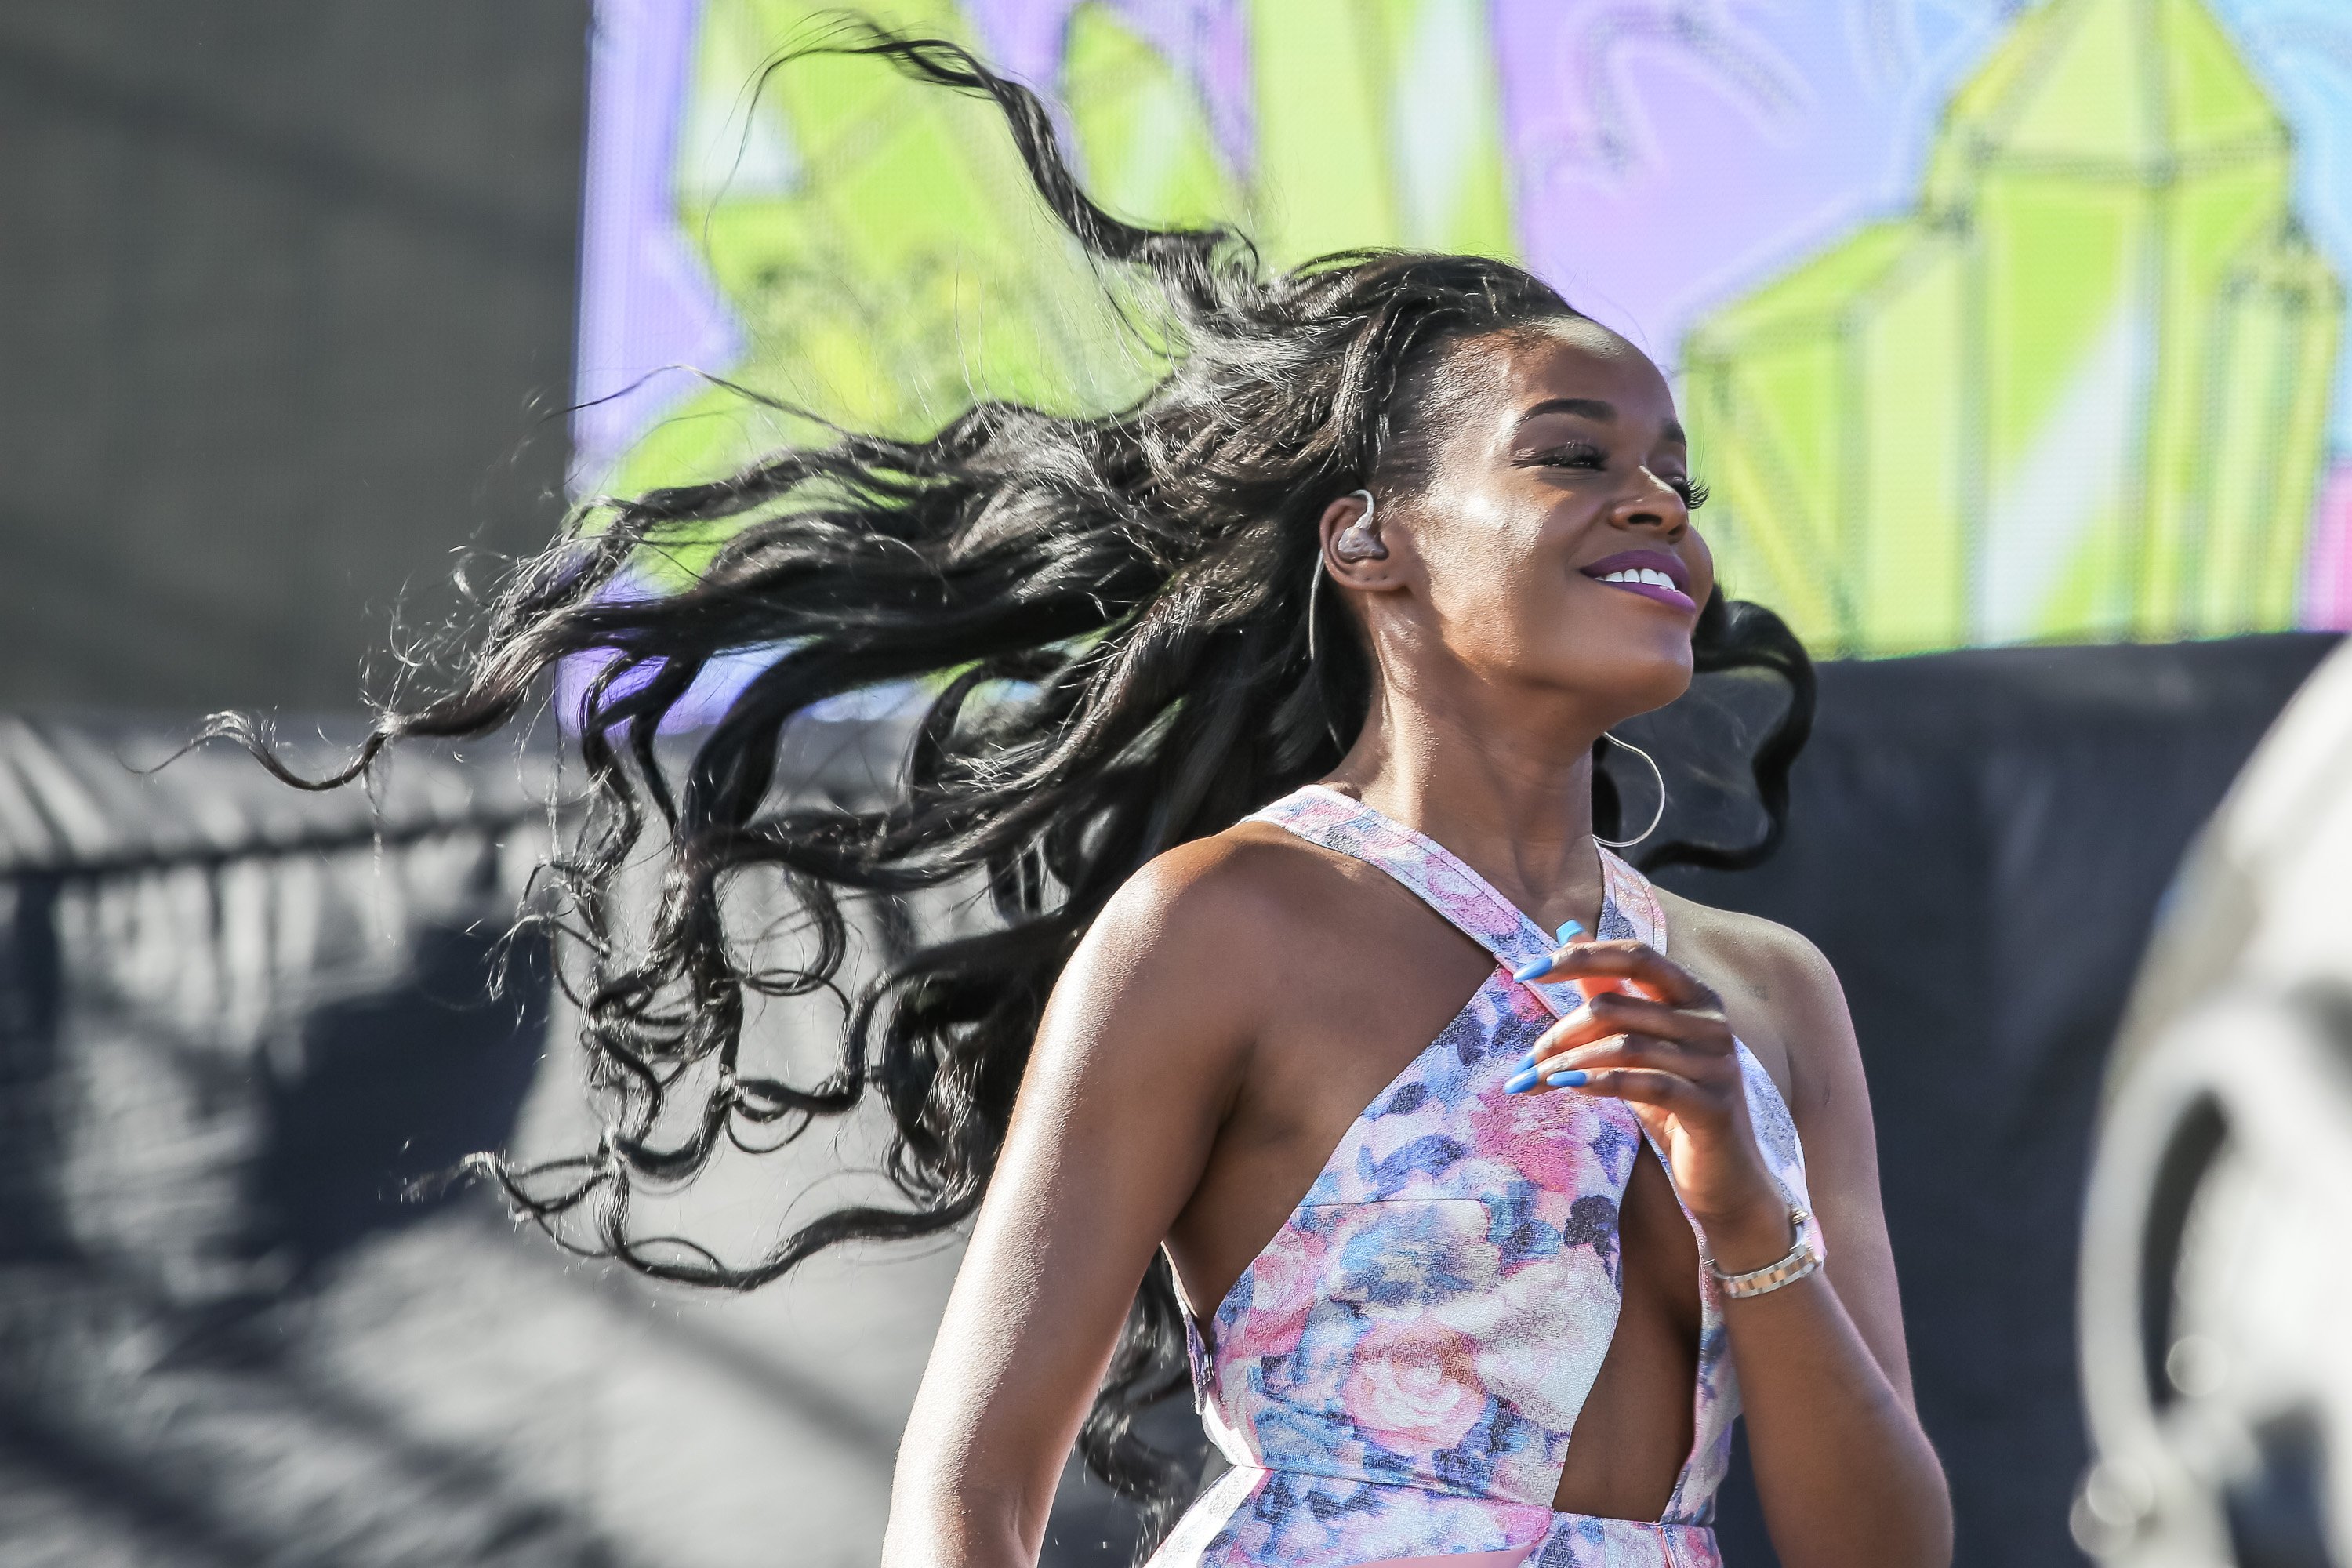 Rapper Azealia Banks performs during the Coachella Valley Music and Arts Festival at The Empire Polo Club, on April 17, 2015, in Indio, California. | Source: Getty Images